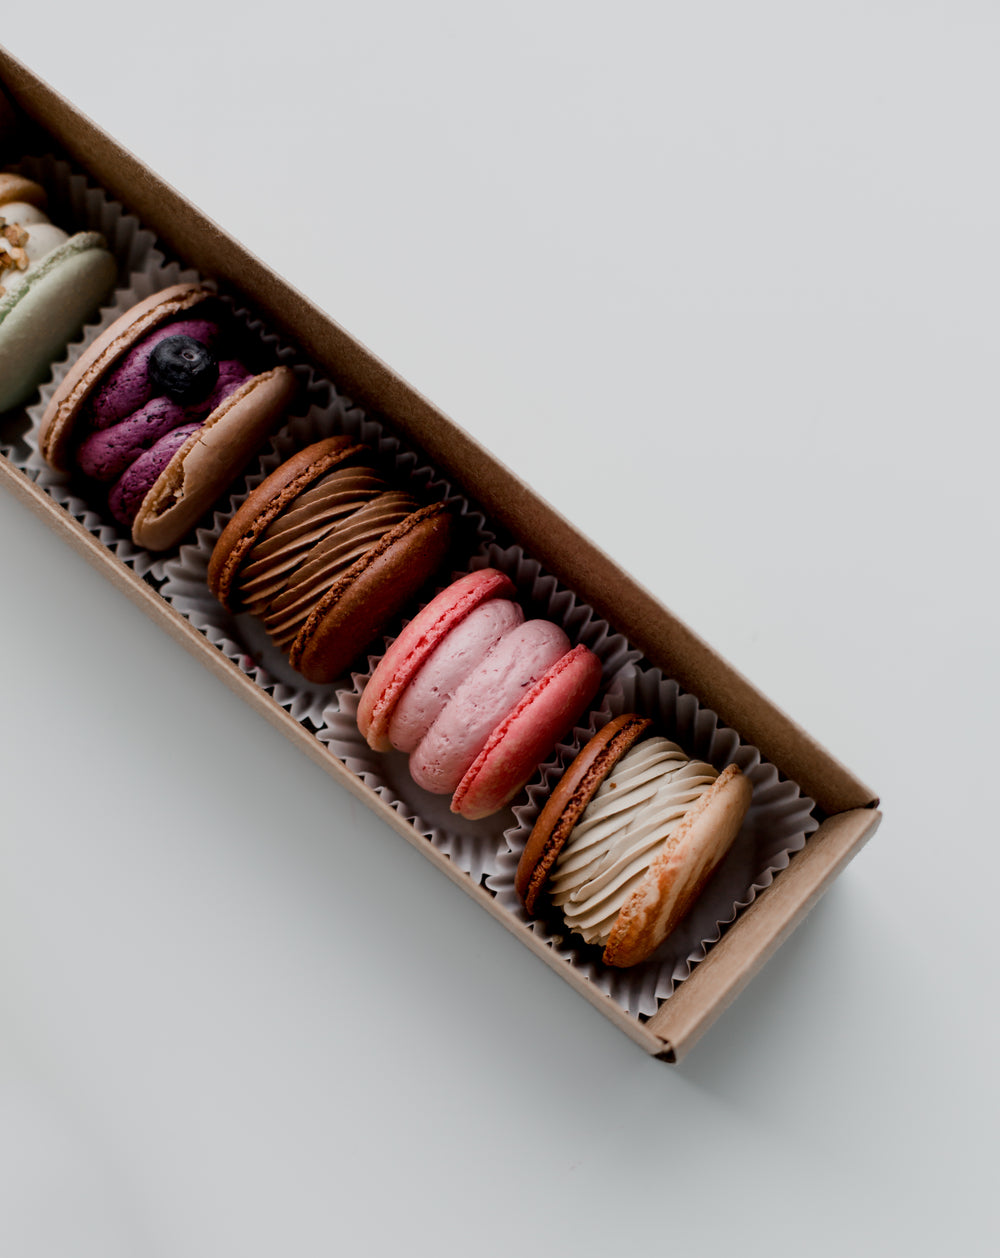 some beautifully packaged macarons